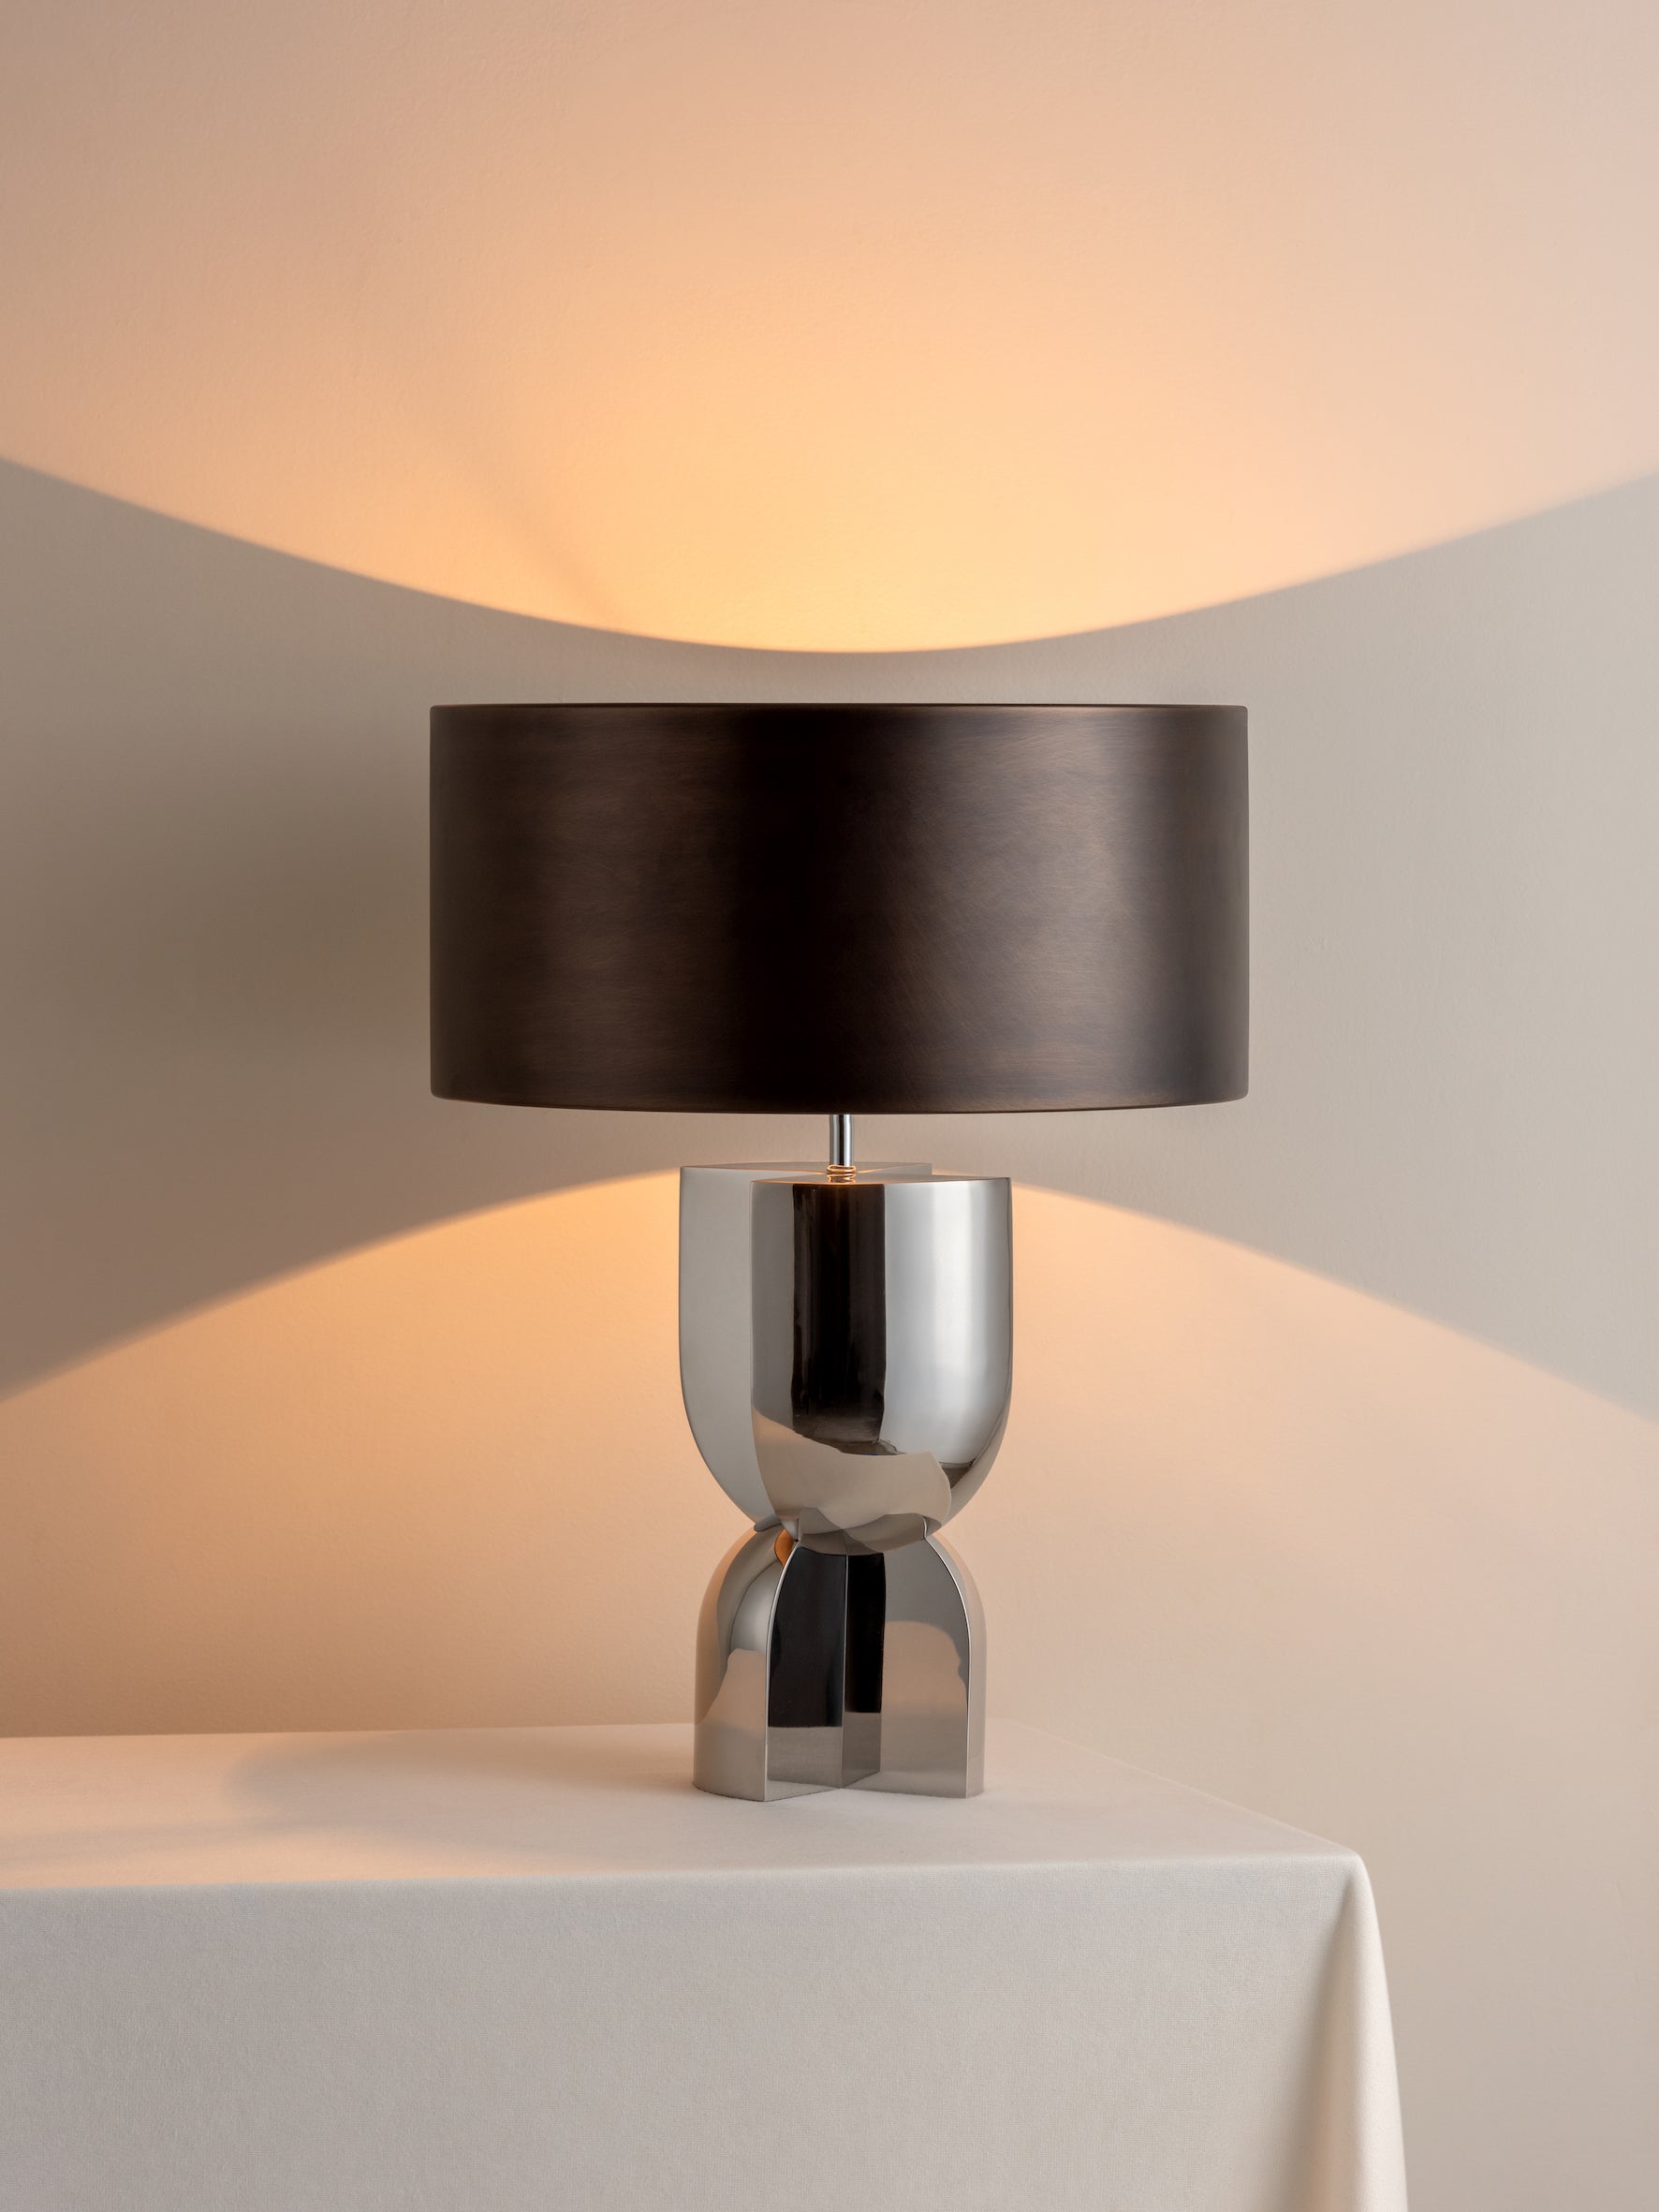 Editions chrome lamp with + bronze shade | Table Lamp | Lights & Lamps | UK | Modern Affordable Designer Lighting